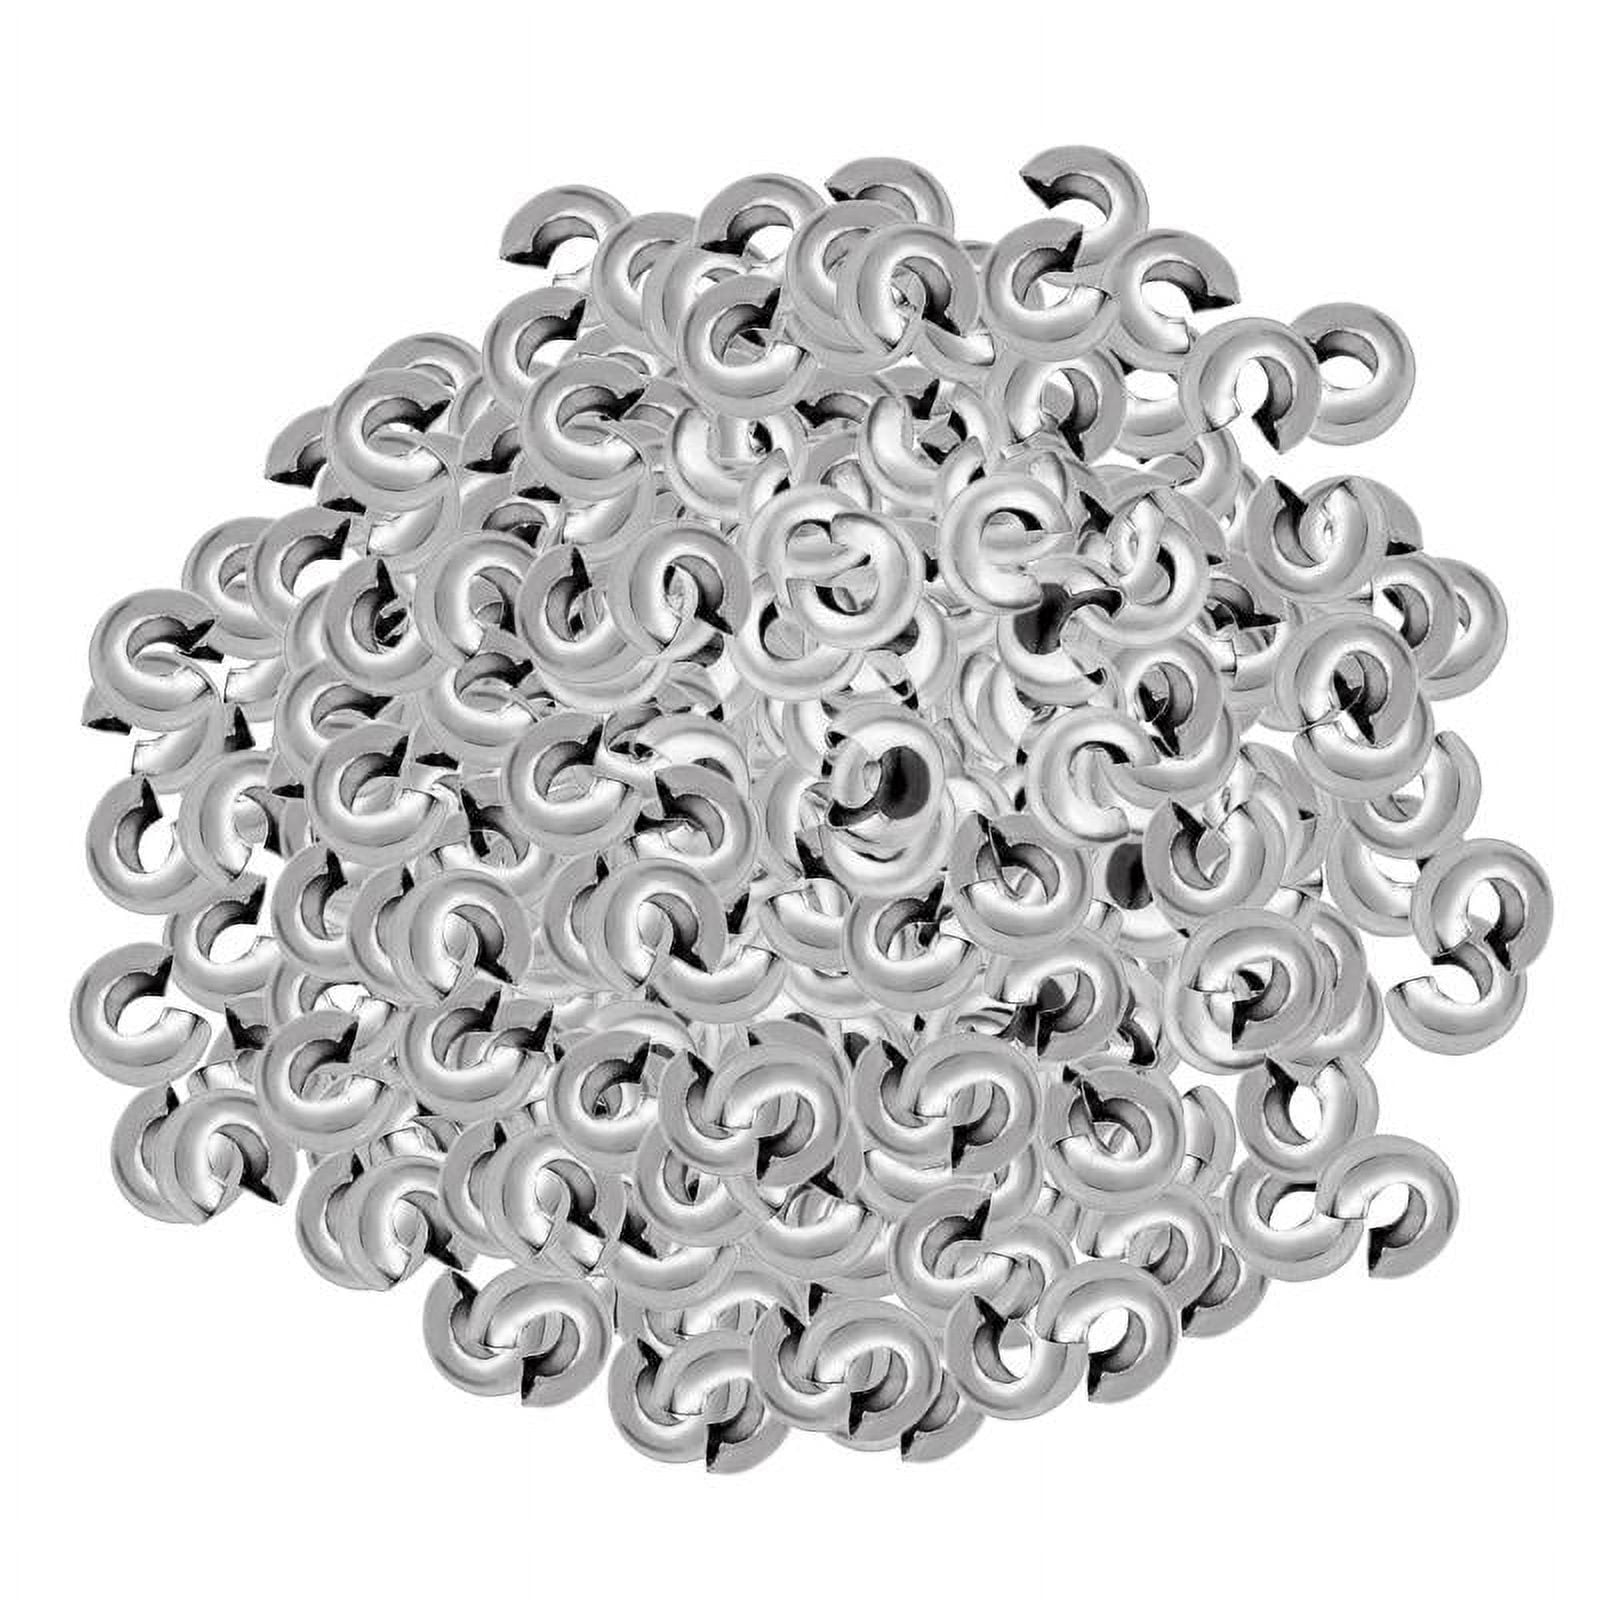 20 Pcs,sterling Silver Crimp Cover Beads,silver Crimp Beads for Jewelry  Making Supplies,cover Beads -  Israel